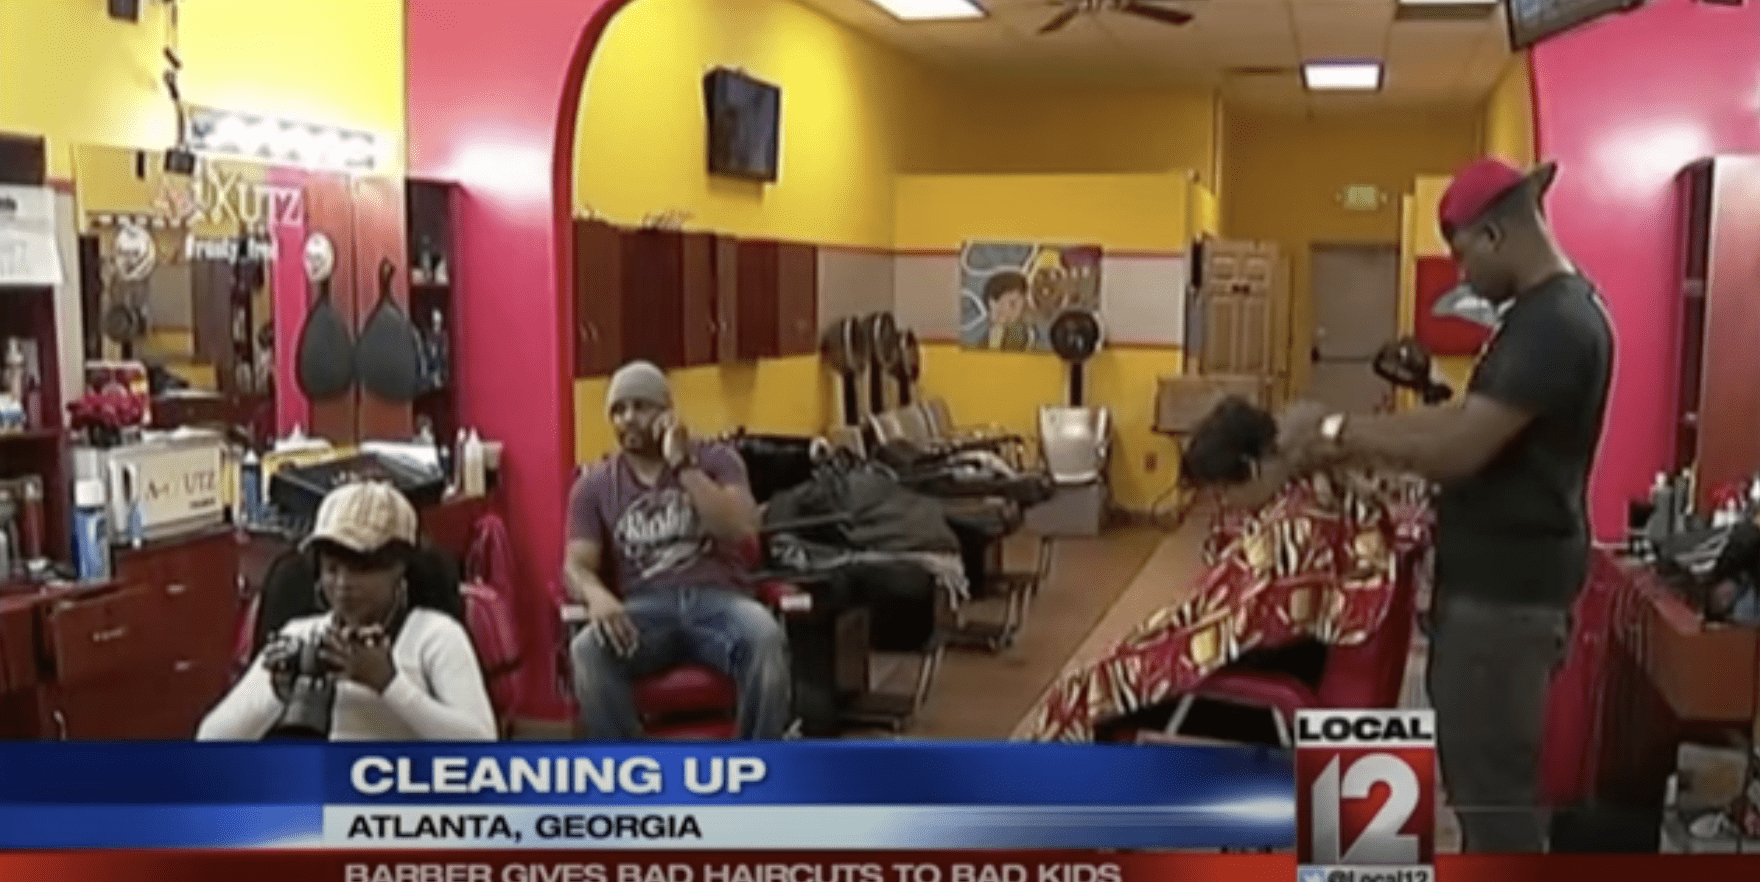 Russell Fredrick and other barbers pictured inside his Atlanta salon. | Source: YouTube.com/LOCAL 12